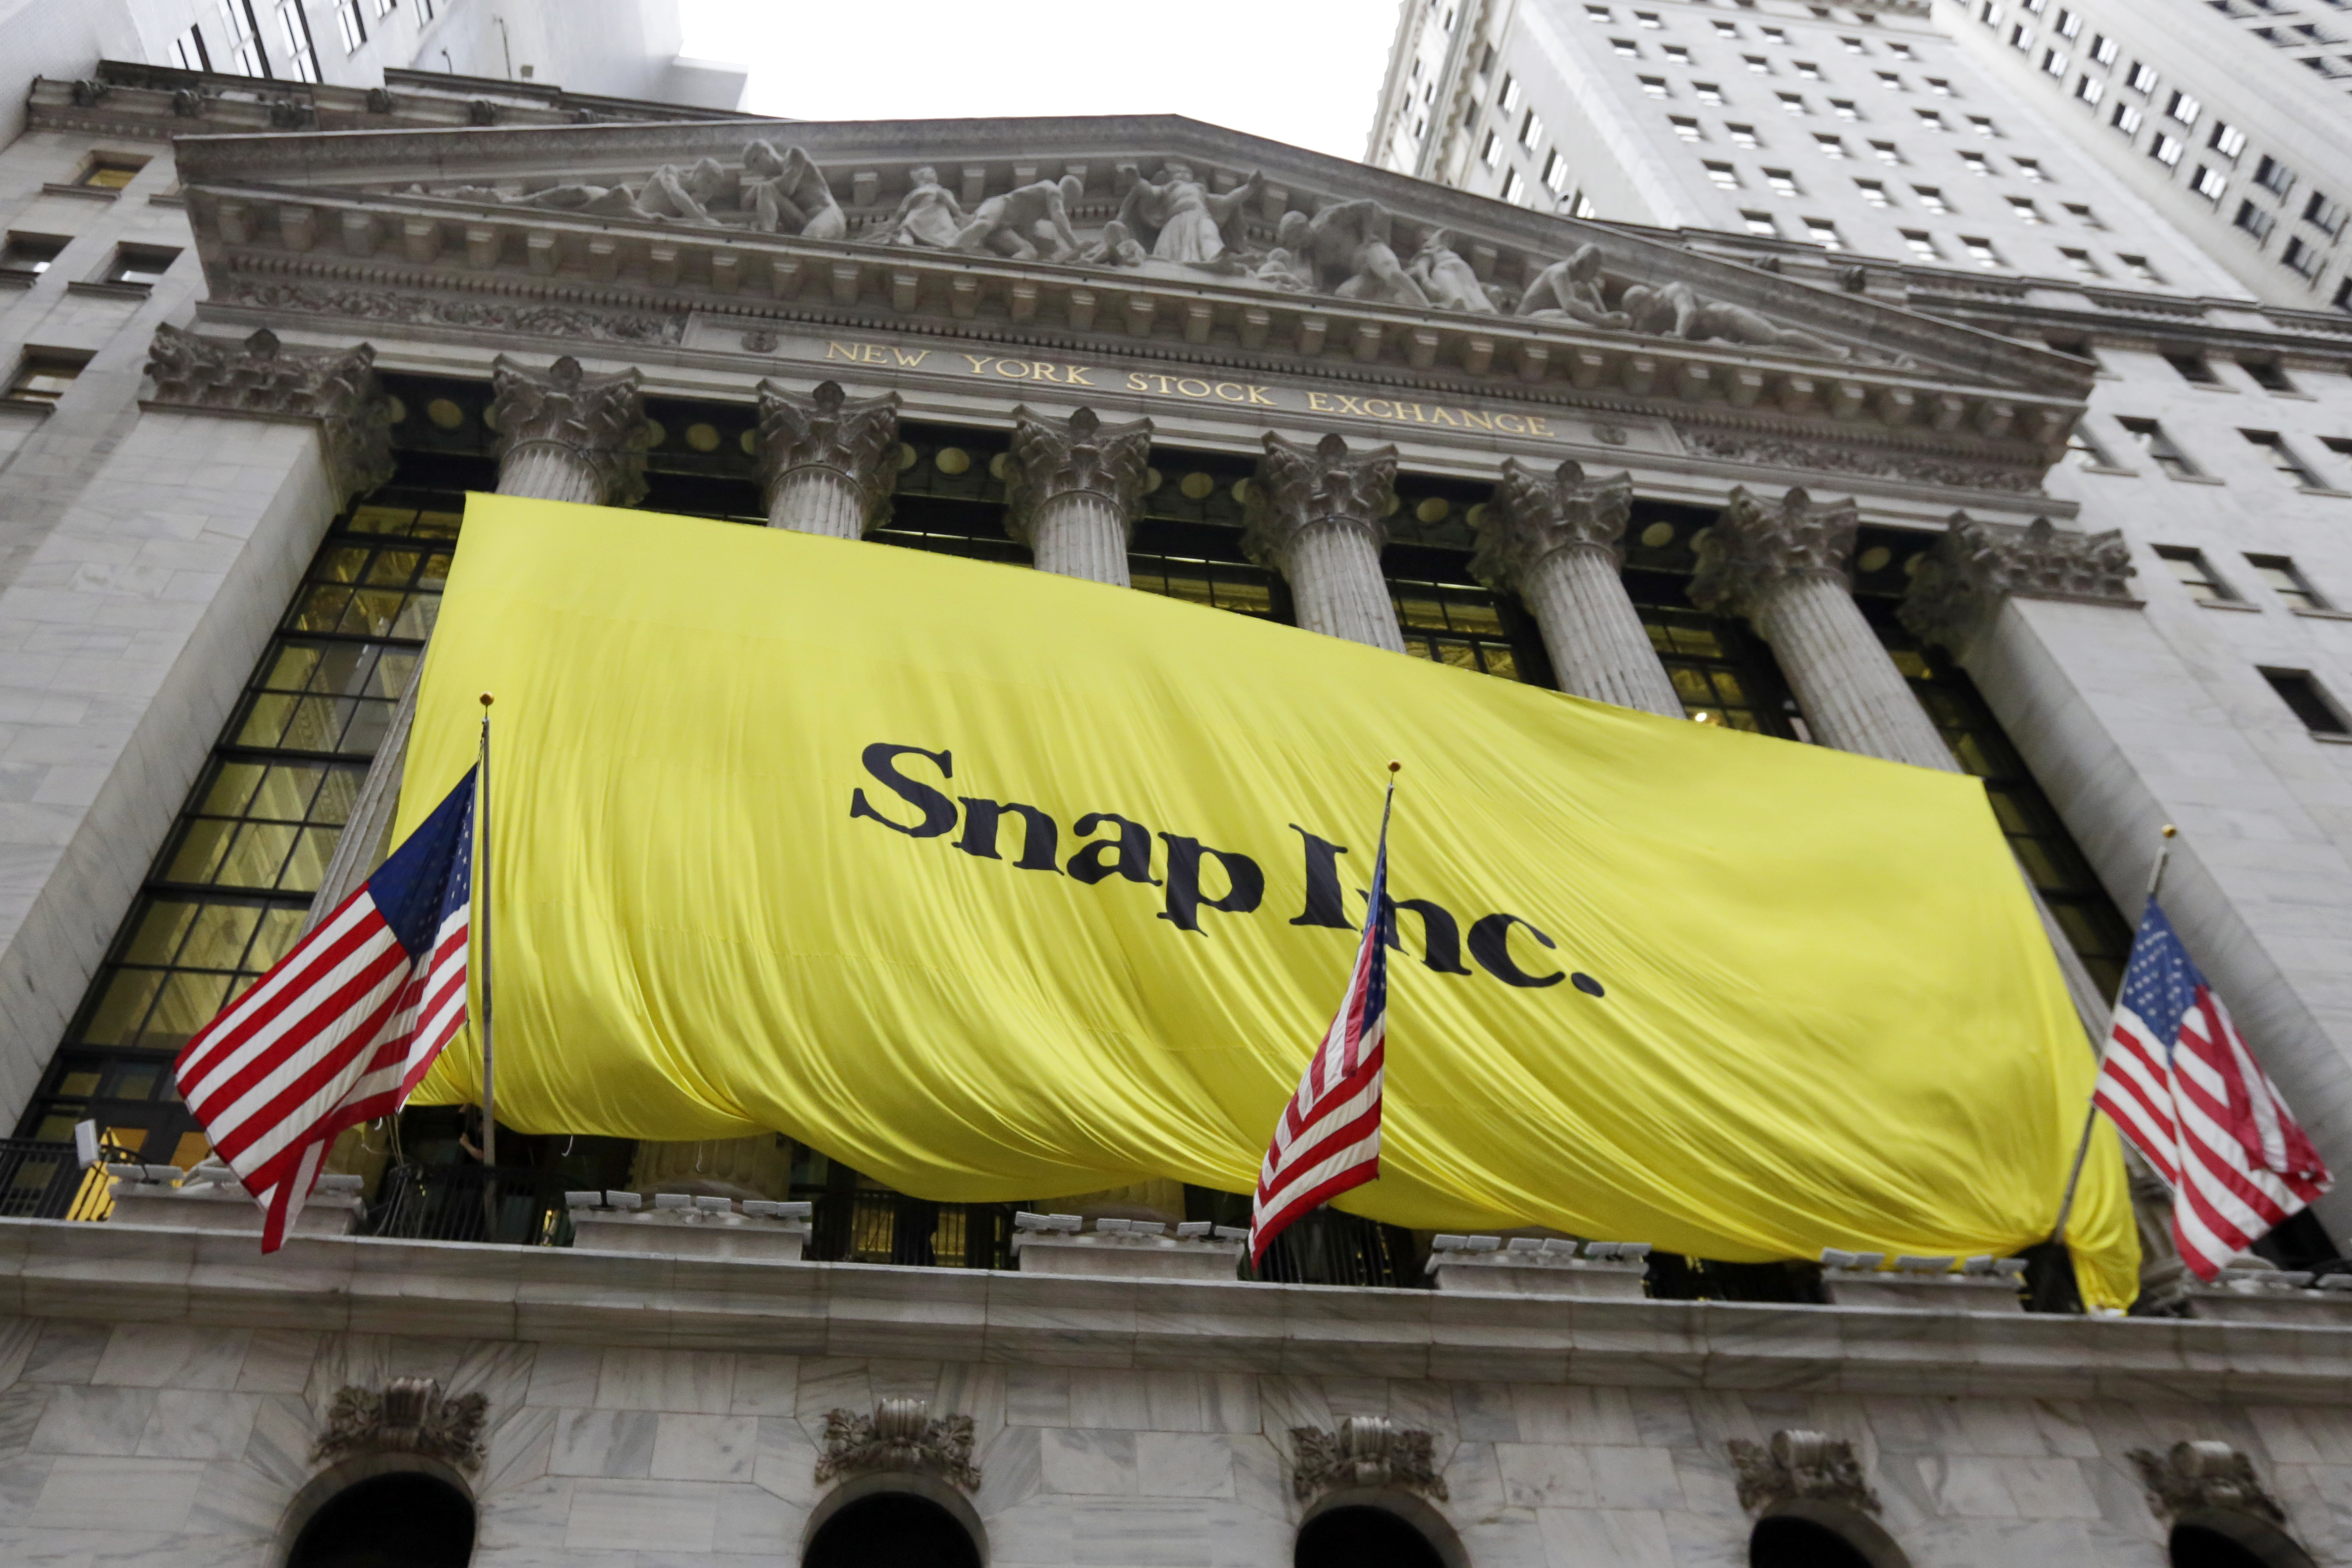 A sign for Snap Inc. at the New York Stock Exchange.